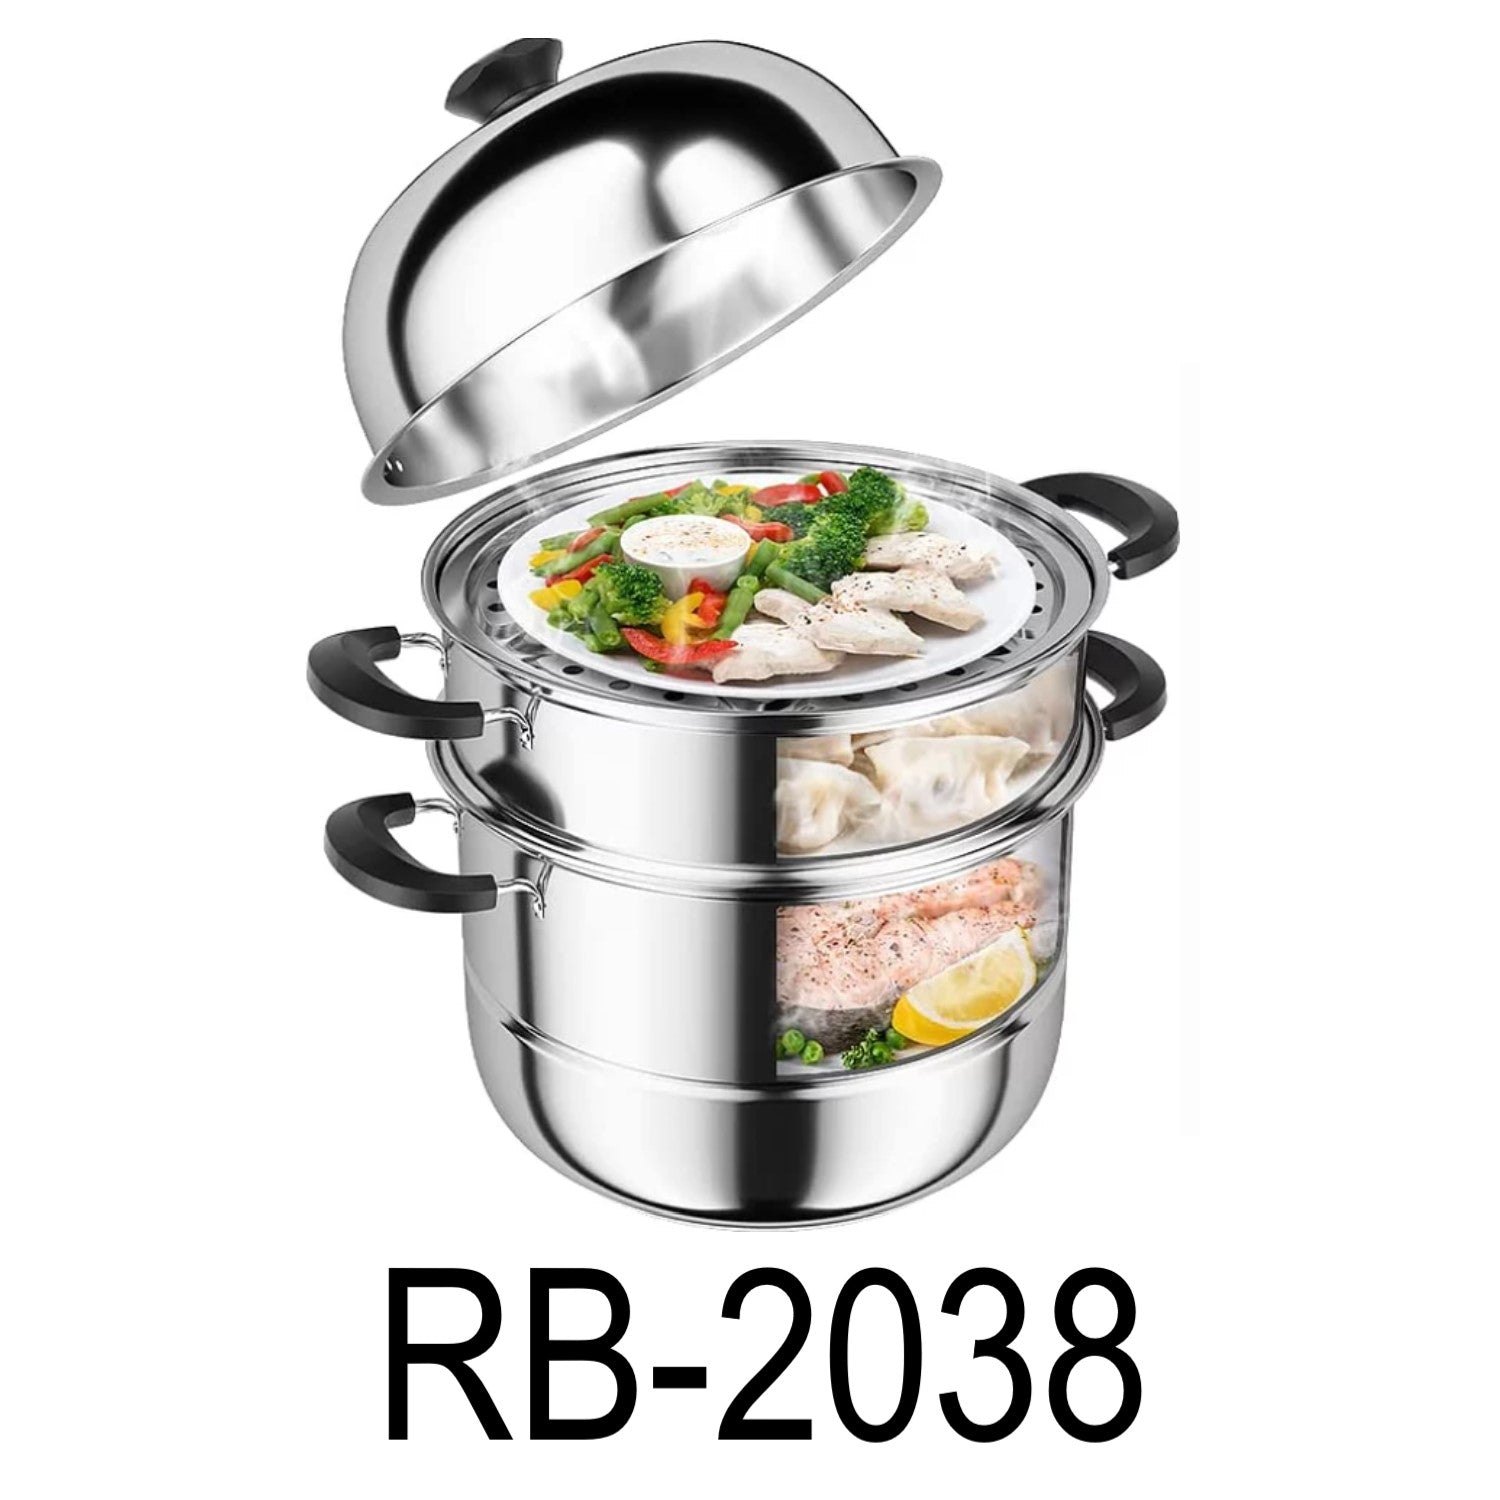 Double Layers Steamer Pot for Cooking Stainless Steel Vegetable Steam